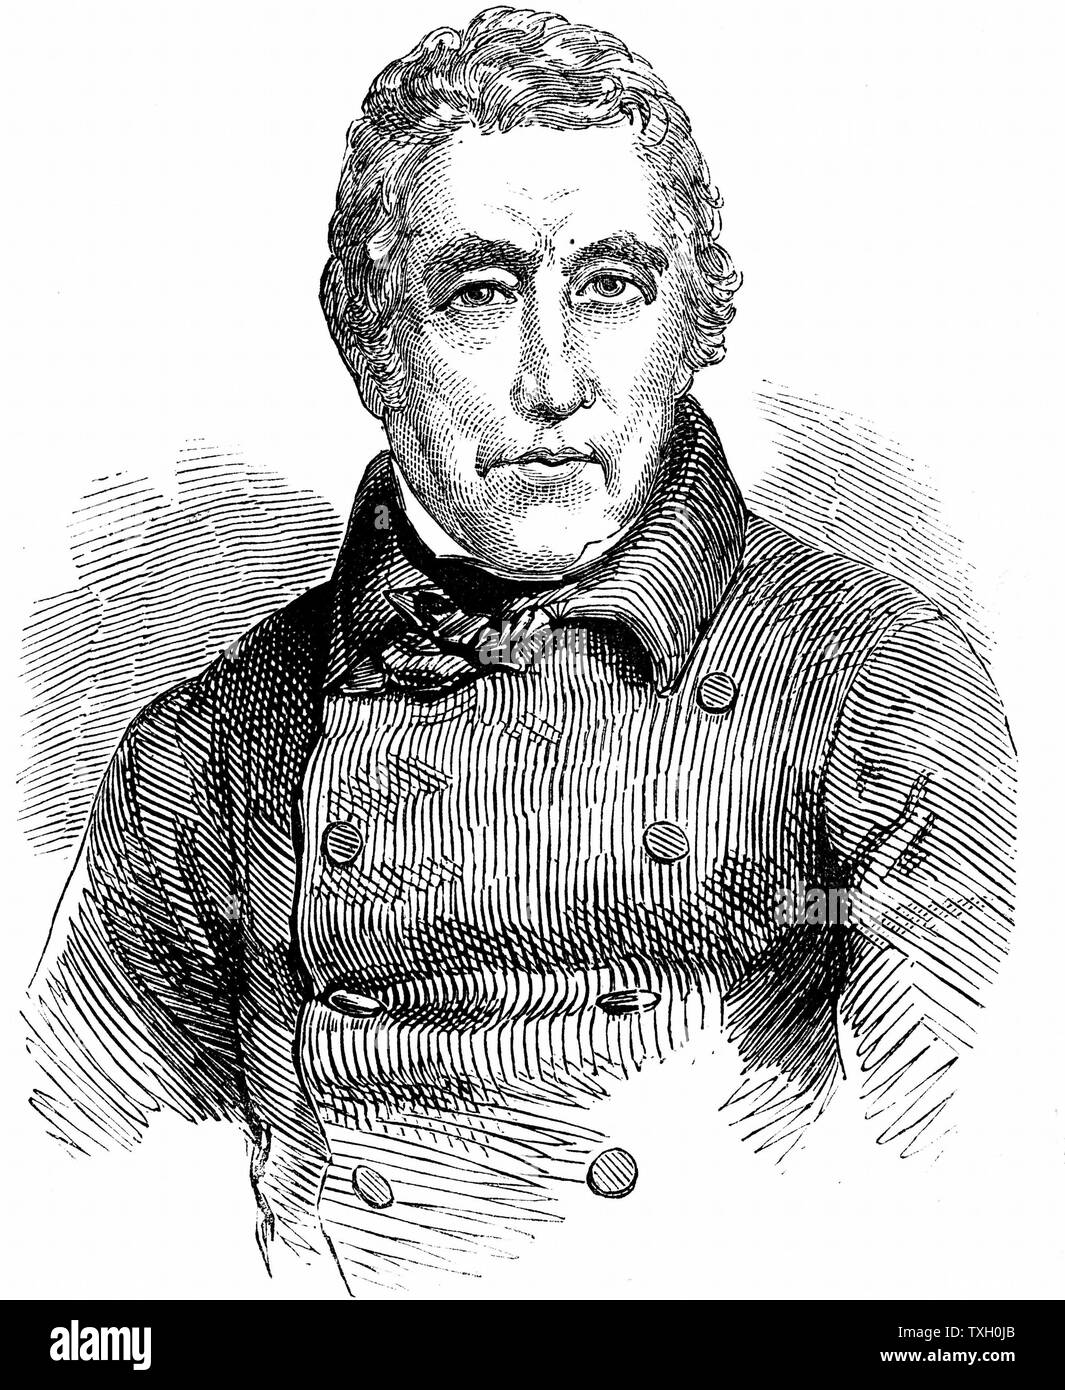 John Barrow (1764-1848) English traveller and naval administrator: 1804-1845 second secretary to the Admiralty: promoted  Arctic expeditions of John Ross, James Clark Ross, and John Franklin. One of founders of (Royal) Geographical Society 1830. Wood engraving 1848 Stock Photo